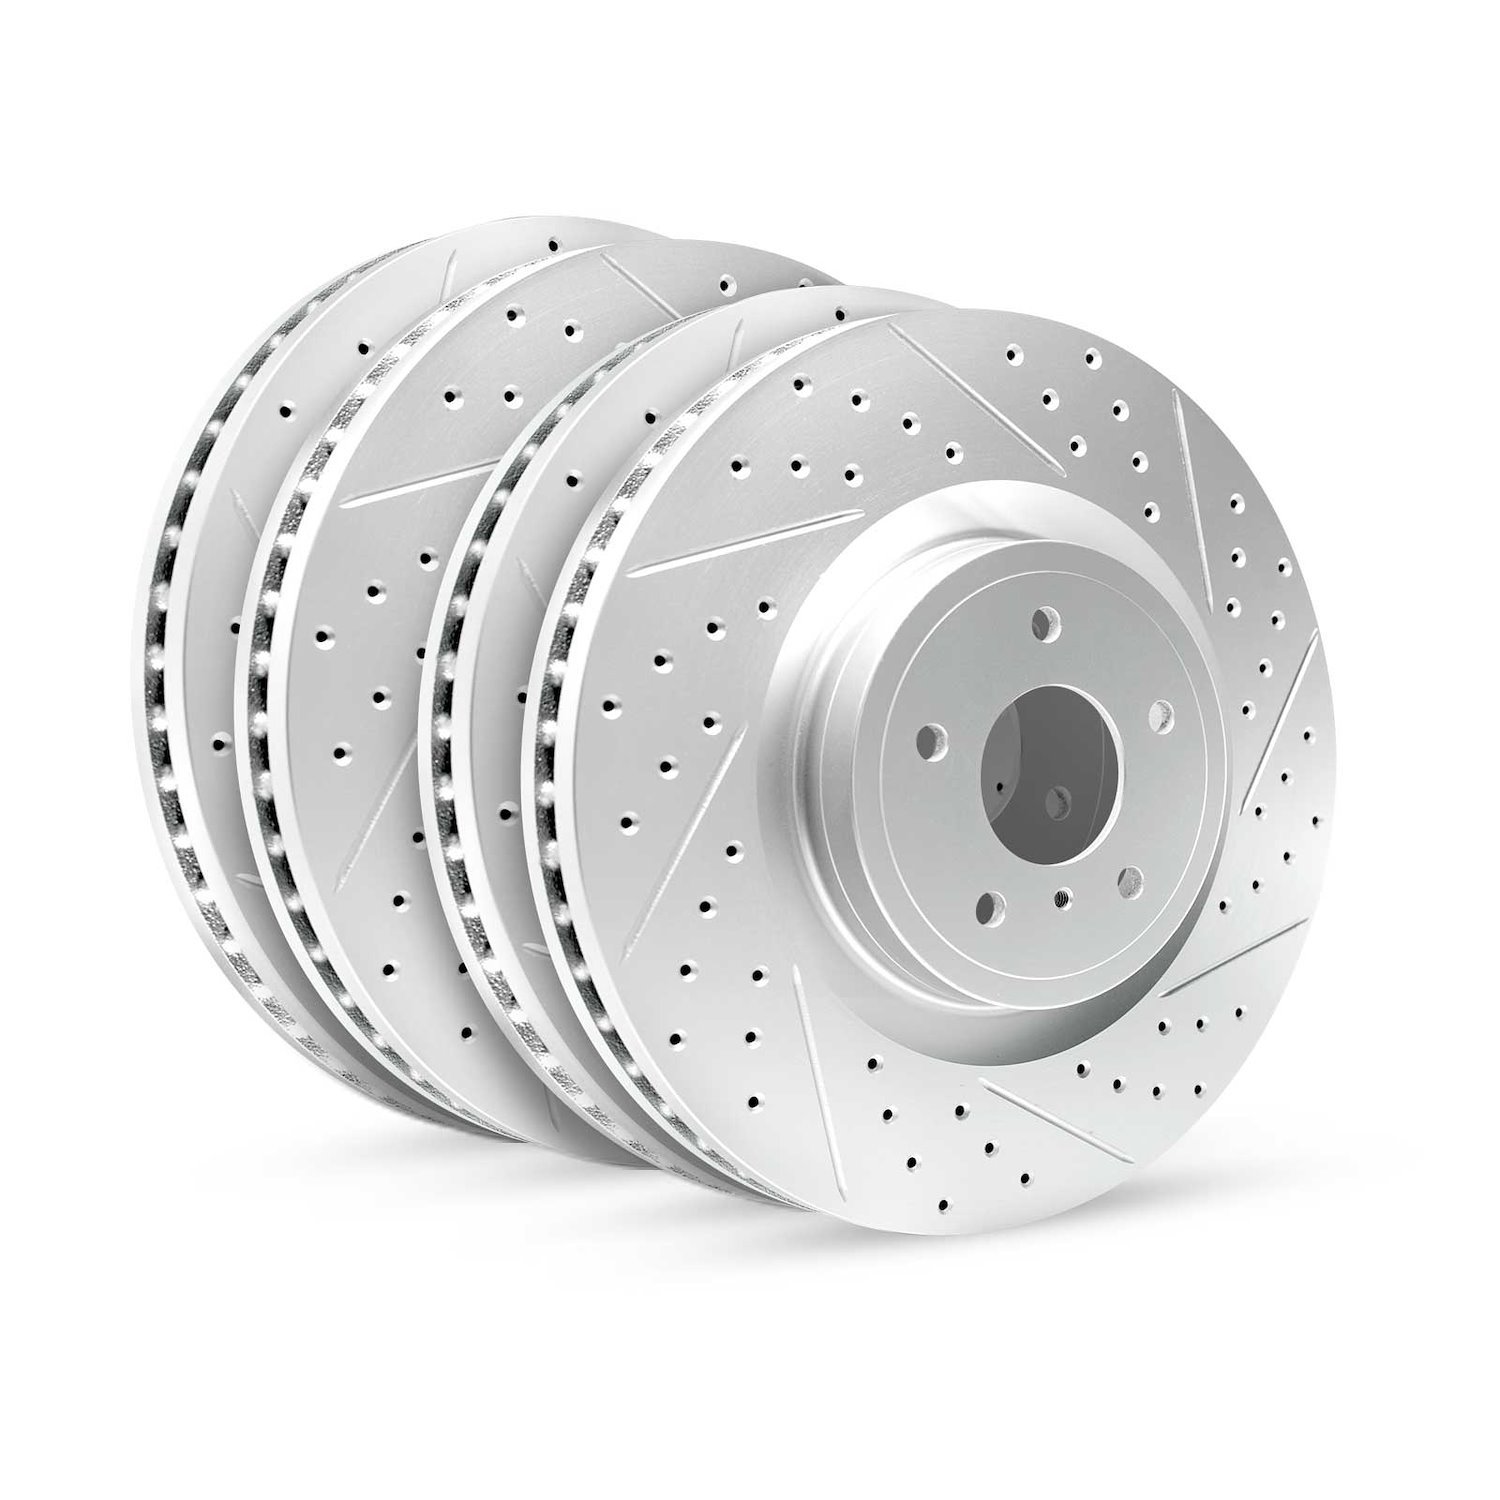 GEO-Carbon Drilled/Slotted Rotors, 2008-2015 Lexus/Toyota/Scion, Position: Front/Rear